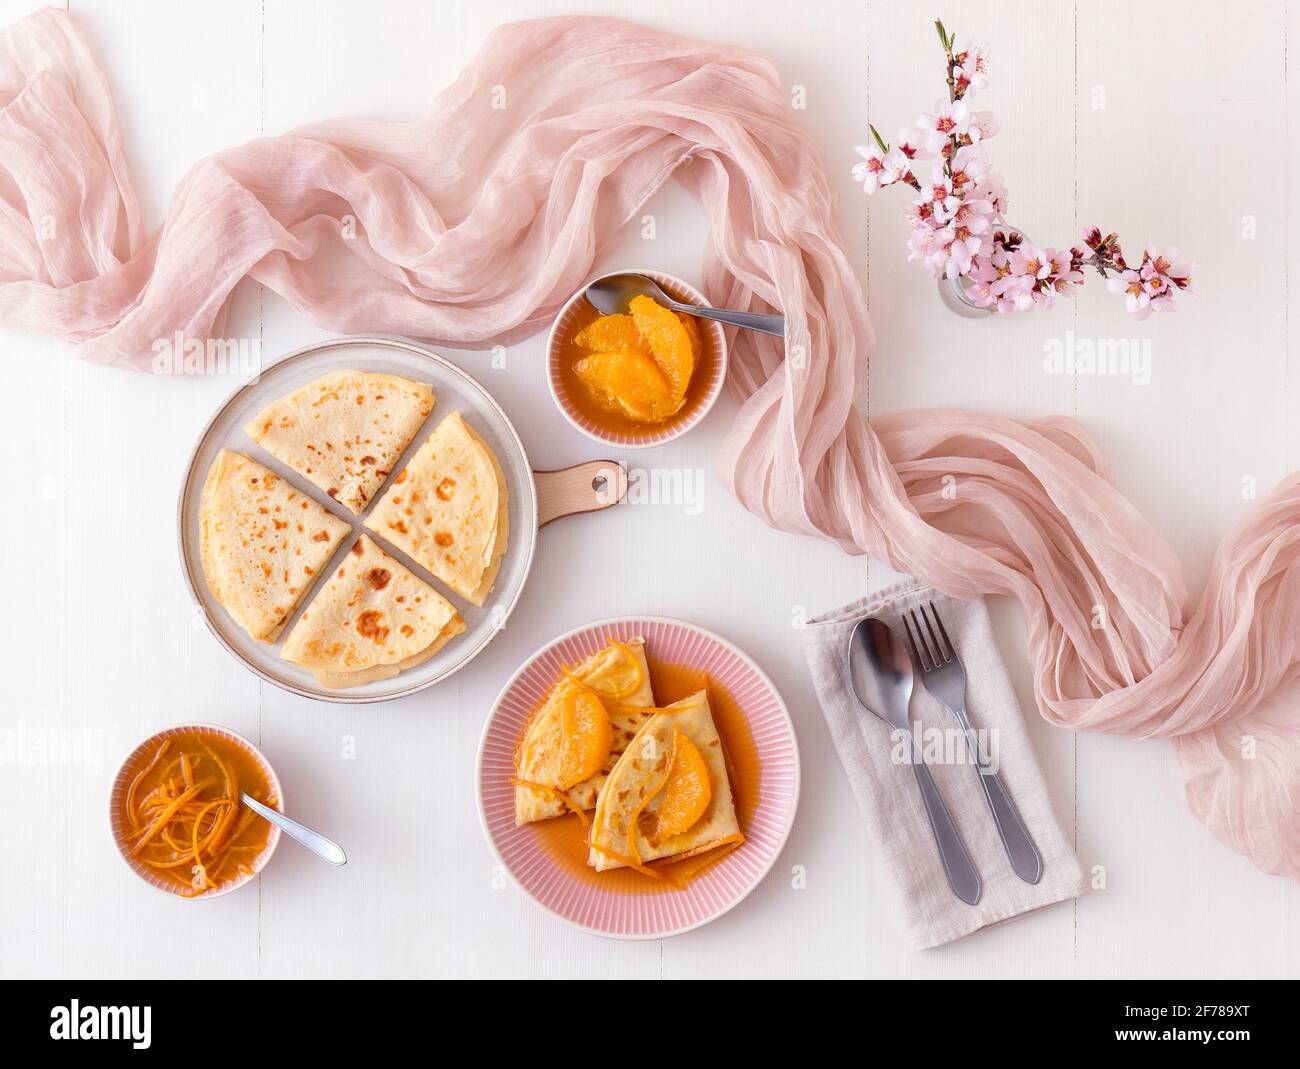 Pancakes Suzette, French traditional dessert. Pancakes with oranges. White wooden table. Top down view. Stock Photo